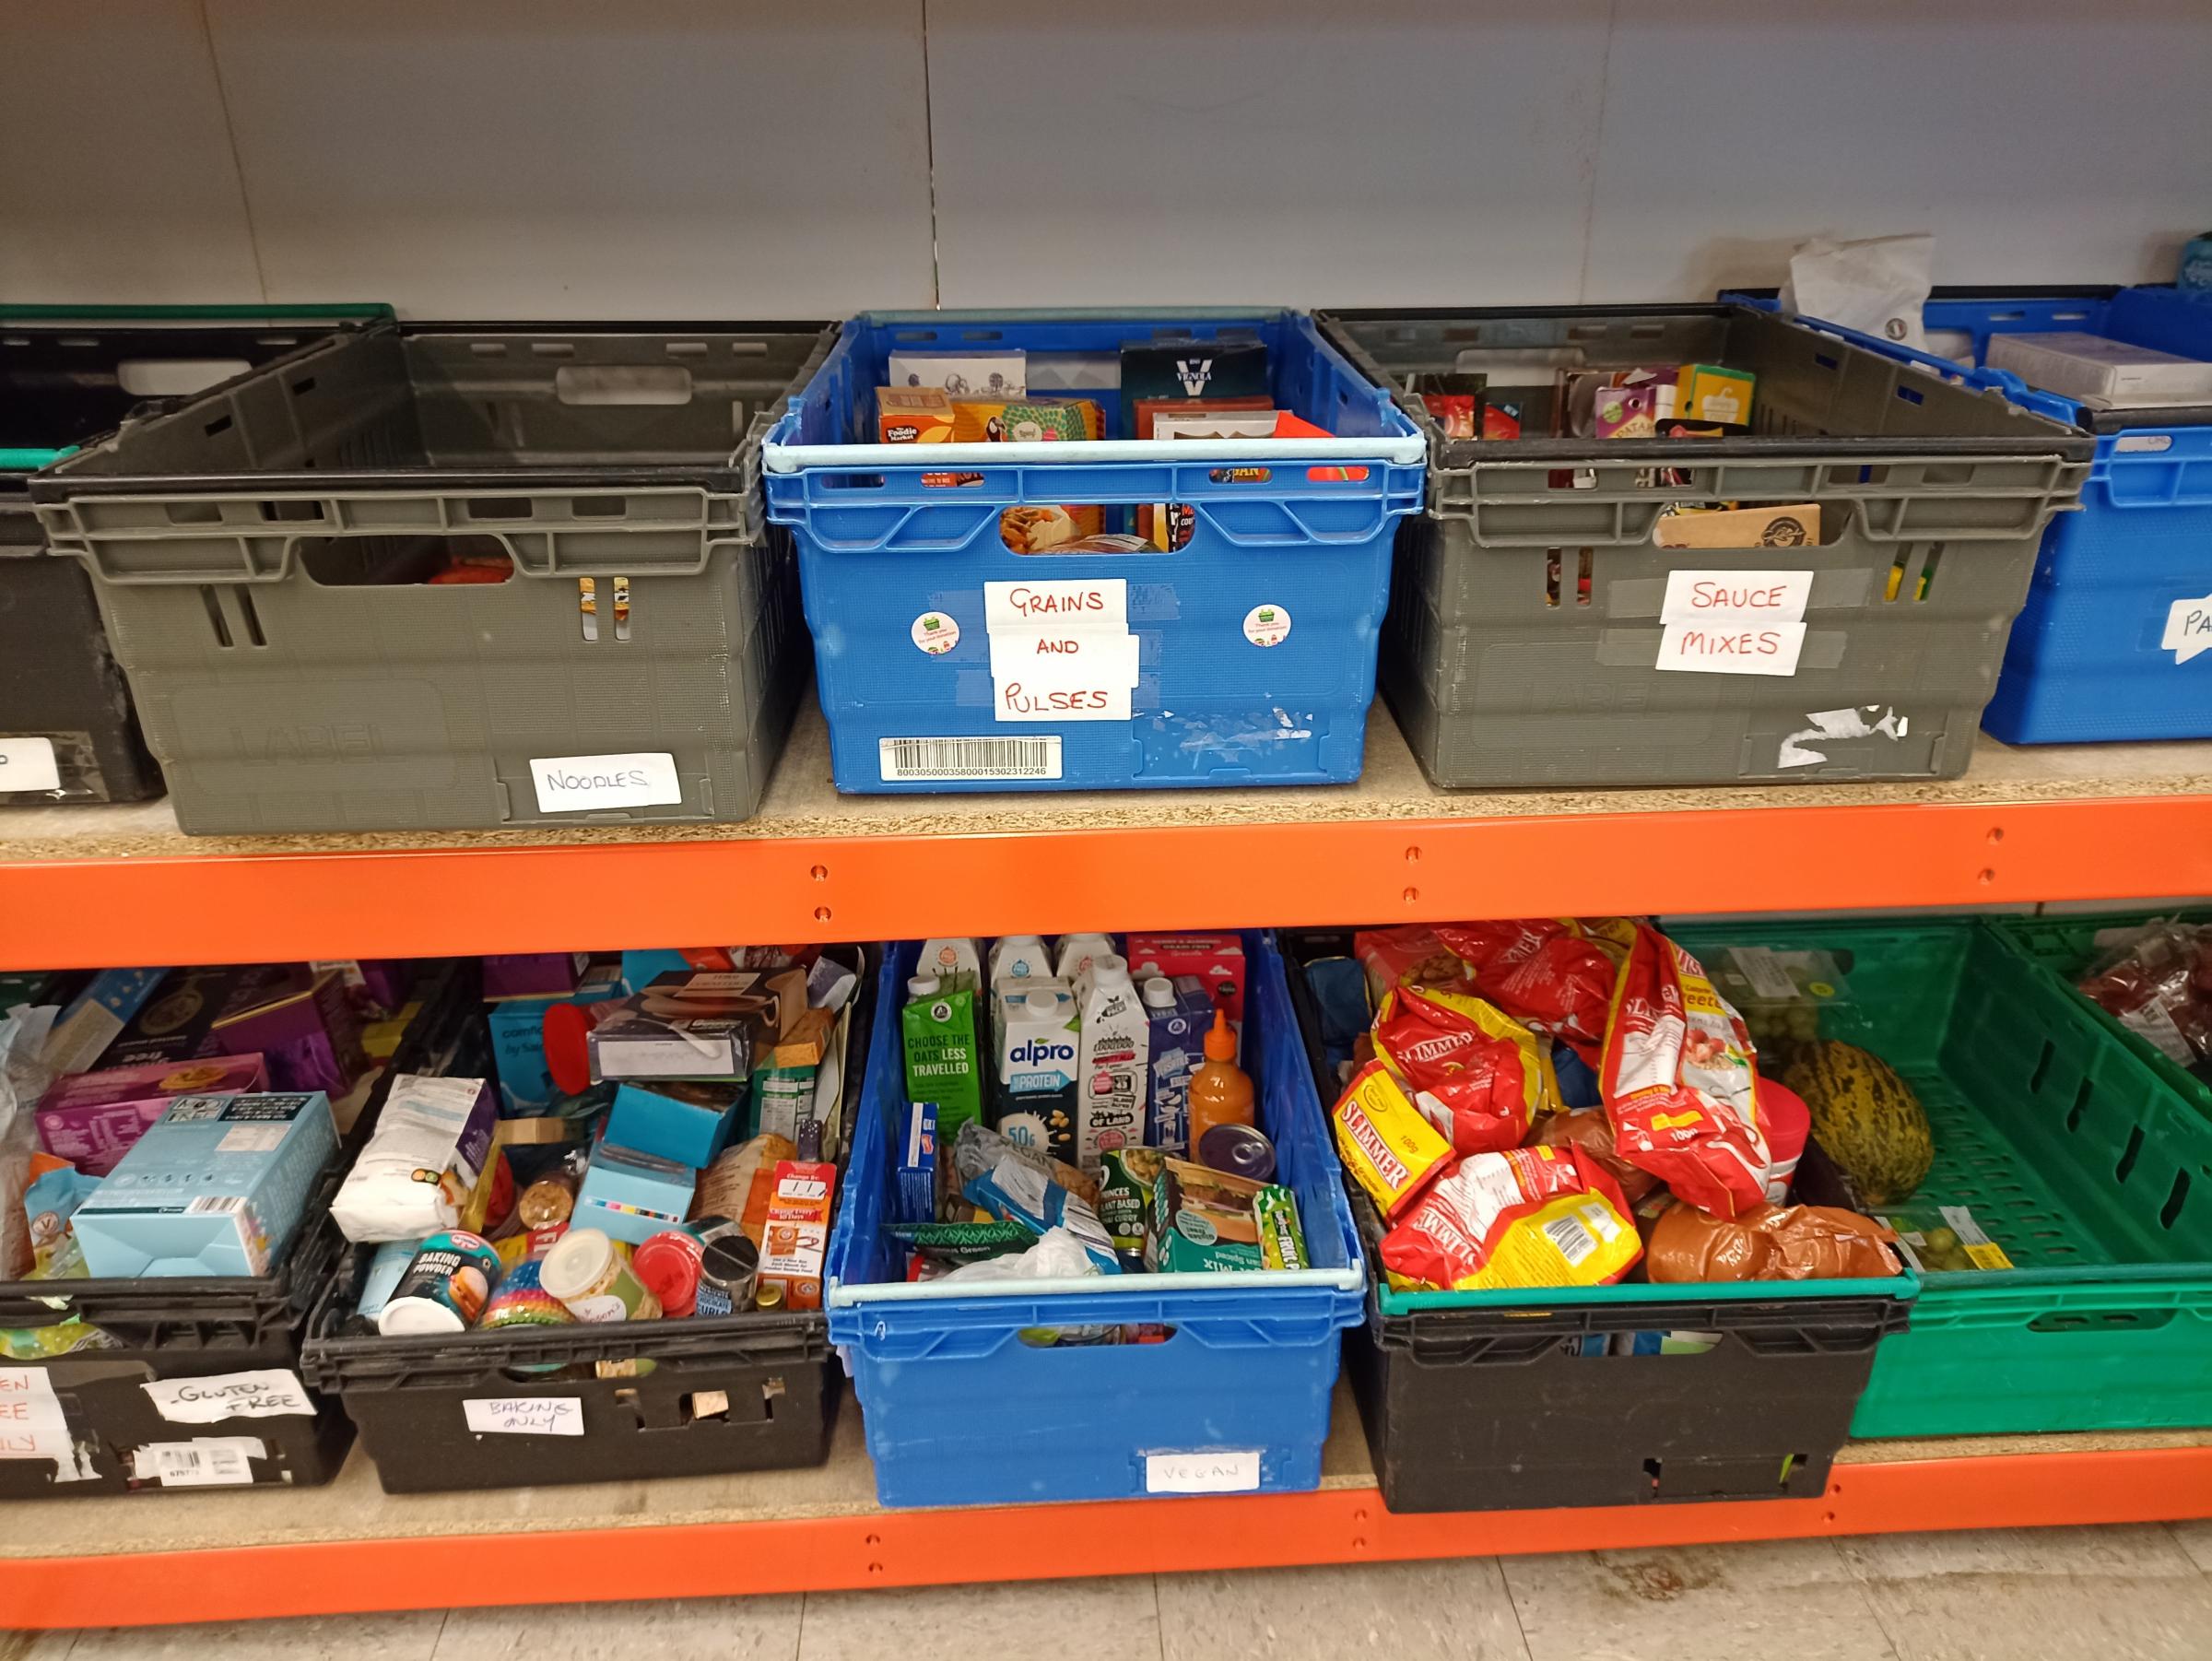 Stocked – all the food at Colchester foodbank is impeccably organised into different boxes